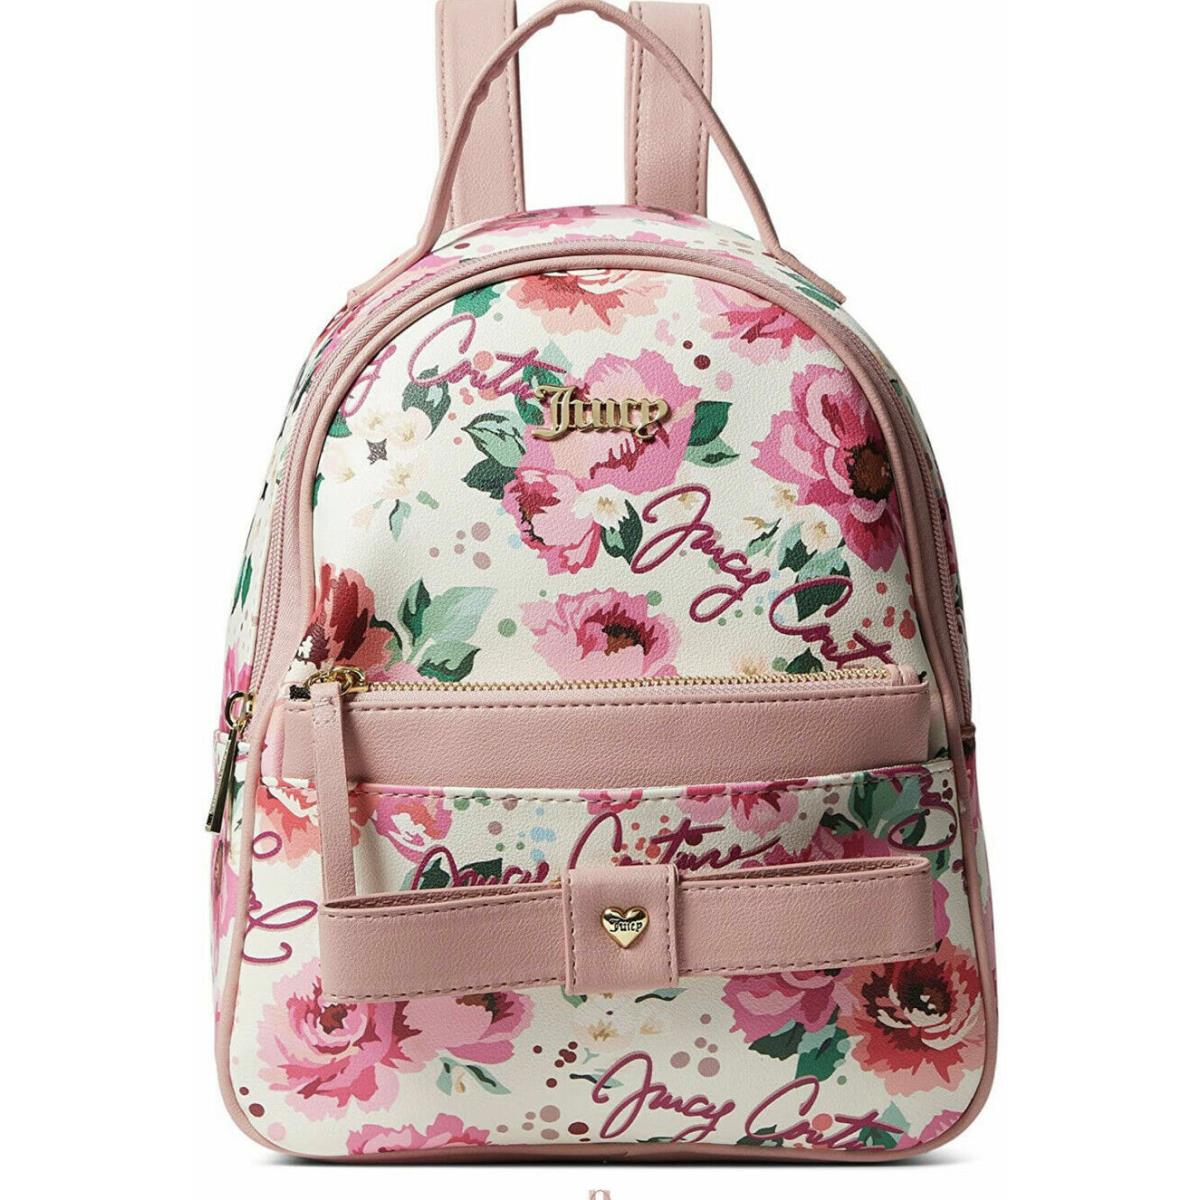 Juicy Couture Peek A Bow Backpack Bag W/ Removable Pouch Women Petal Cream